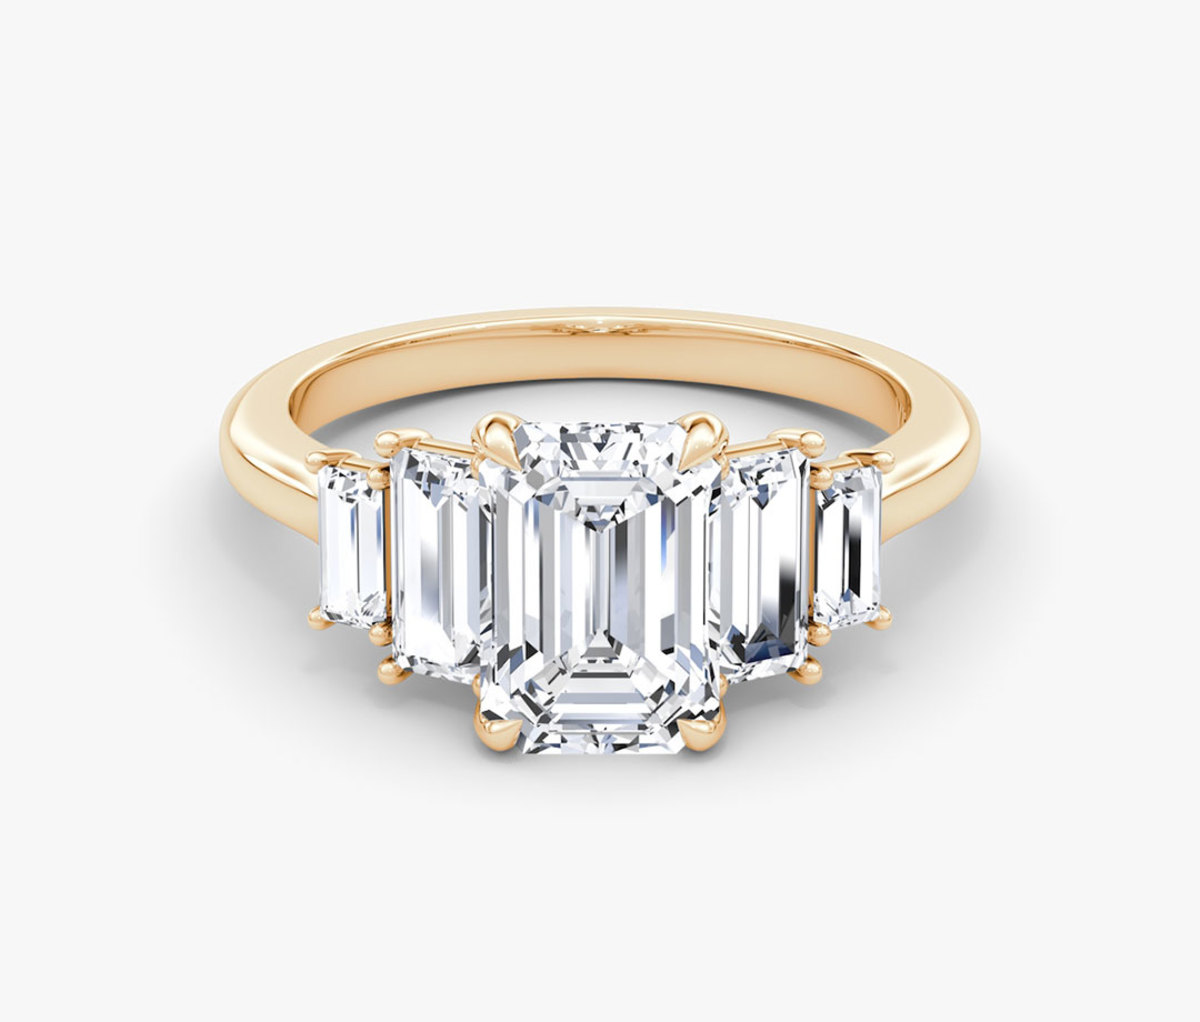 Ethical Engagement Rings: Conflict-Free, Lab-Grown Diamonds - Men's Journal